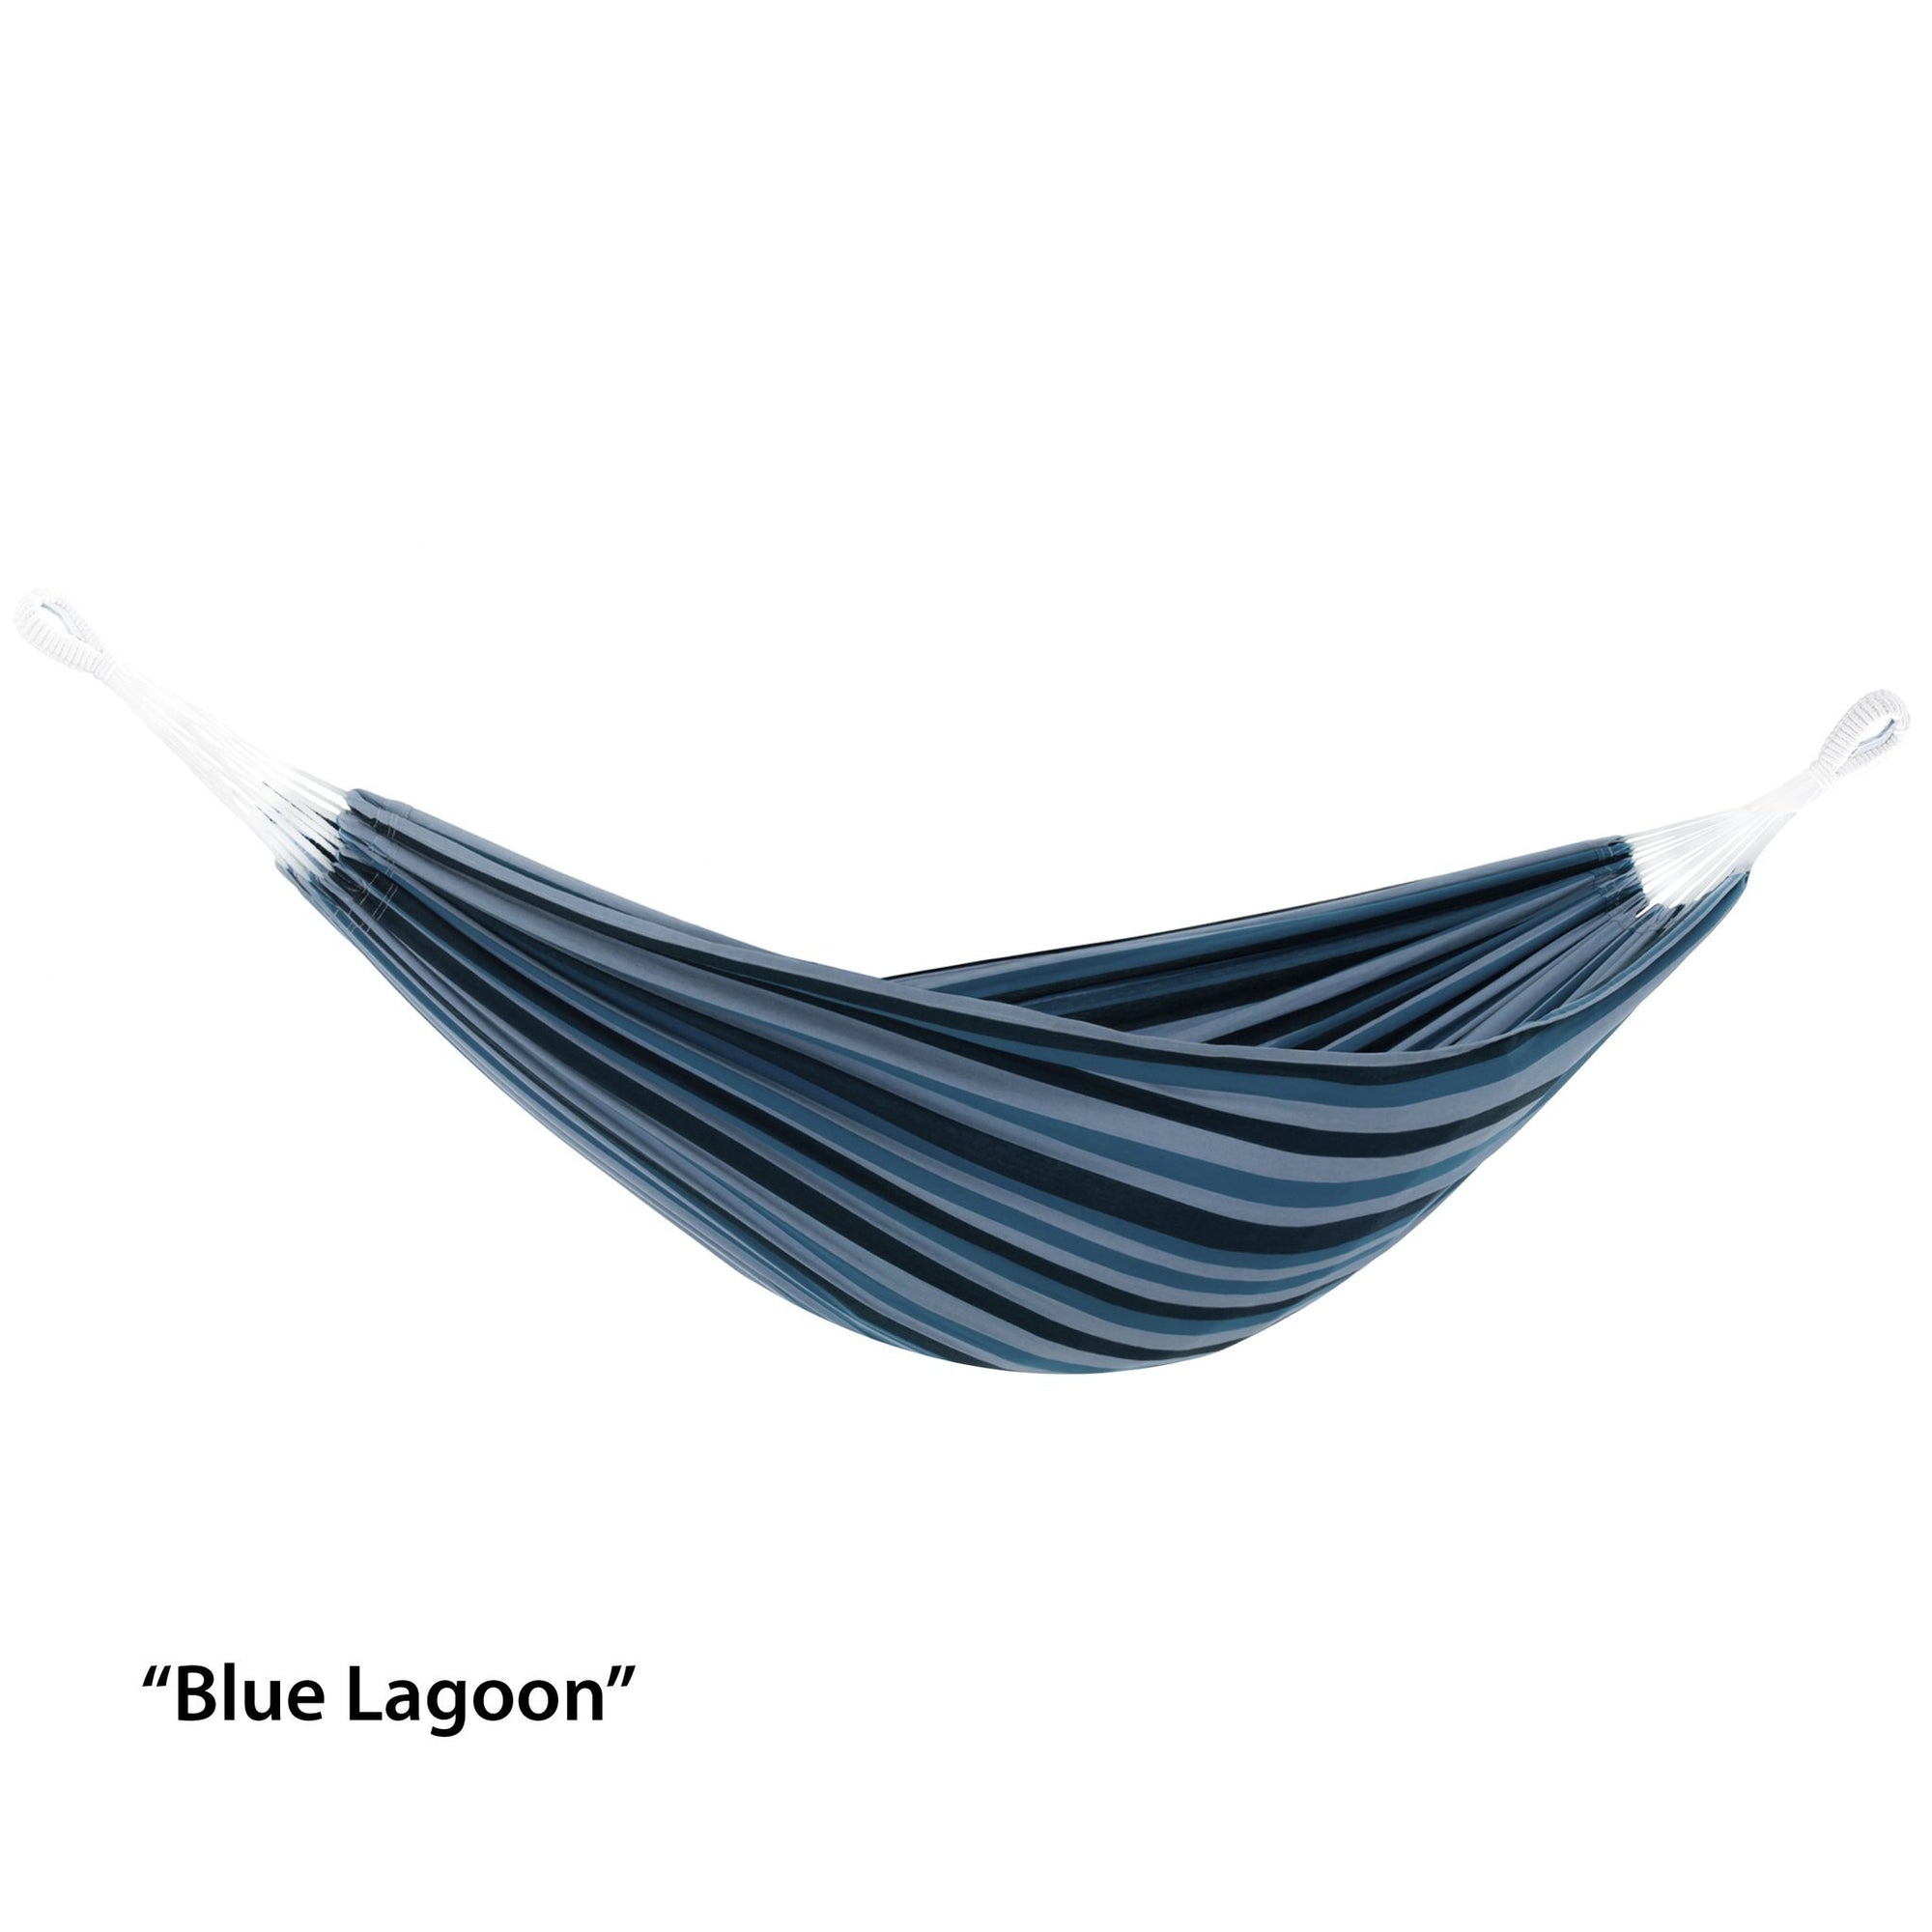 Replacement Brazilian Hammock for Combo